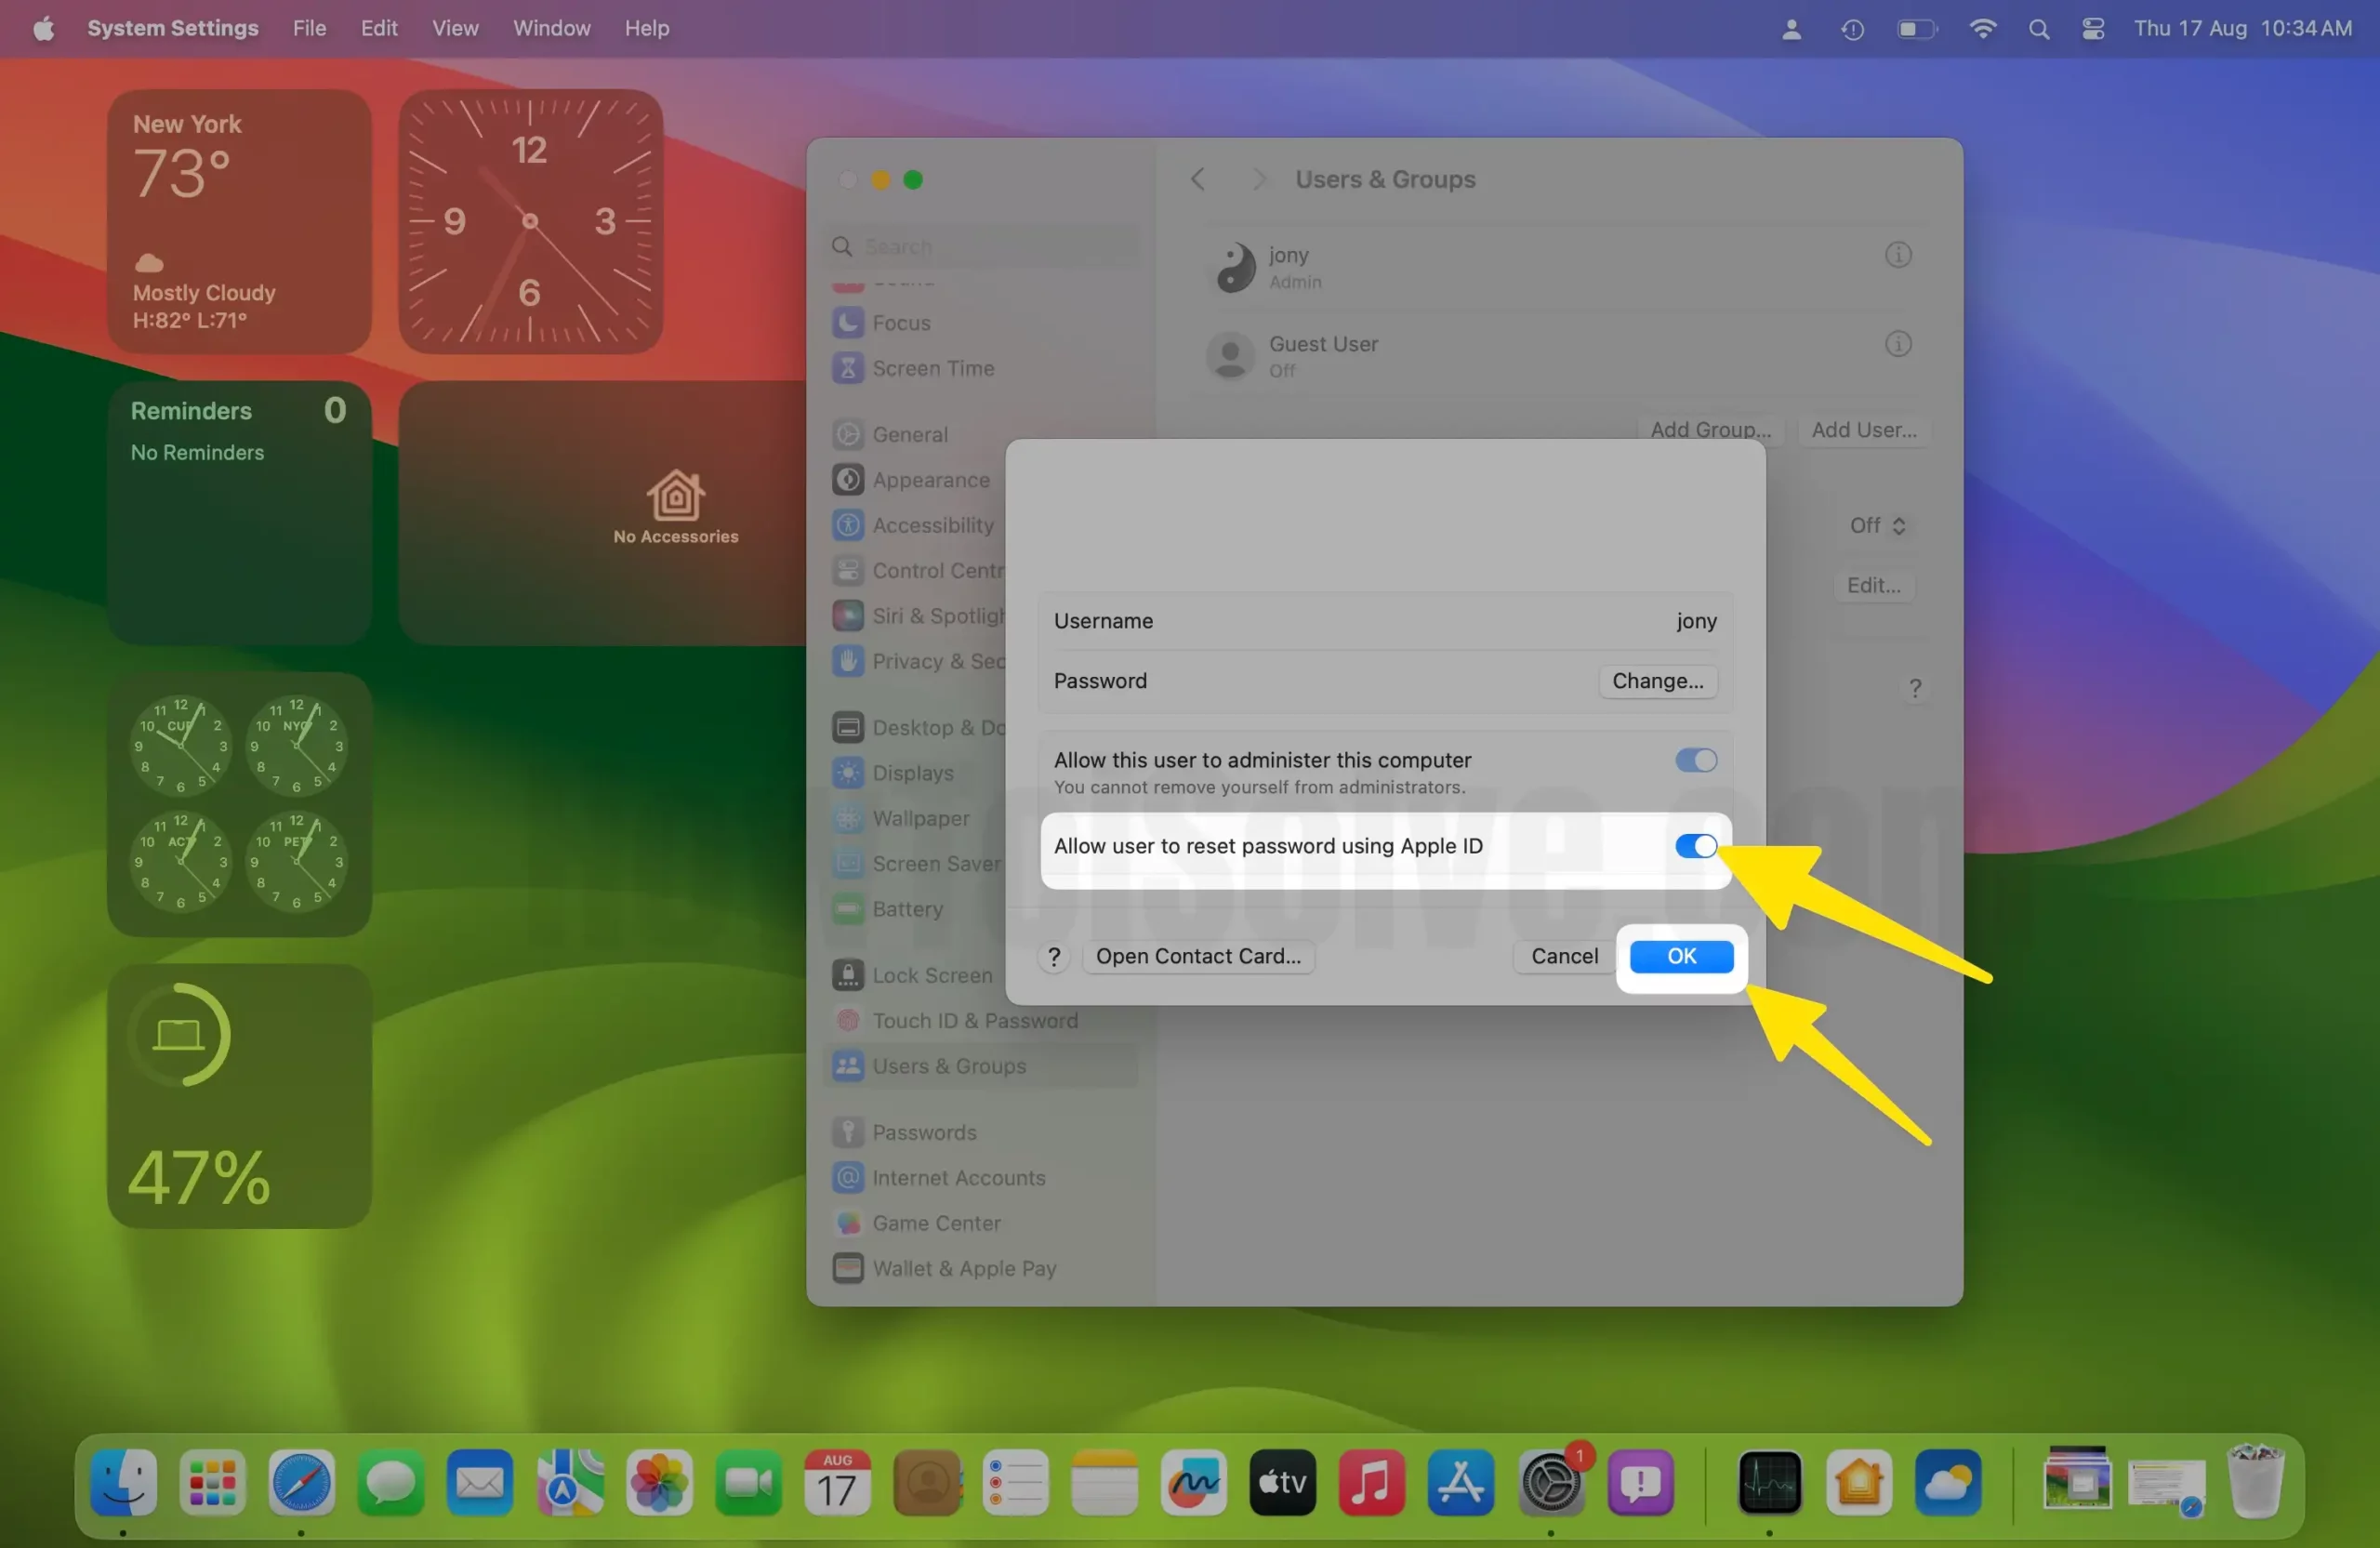 Select the check box for allow user to reset password using apple ID select OK button on mac